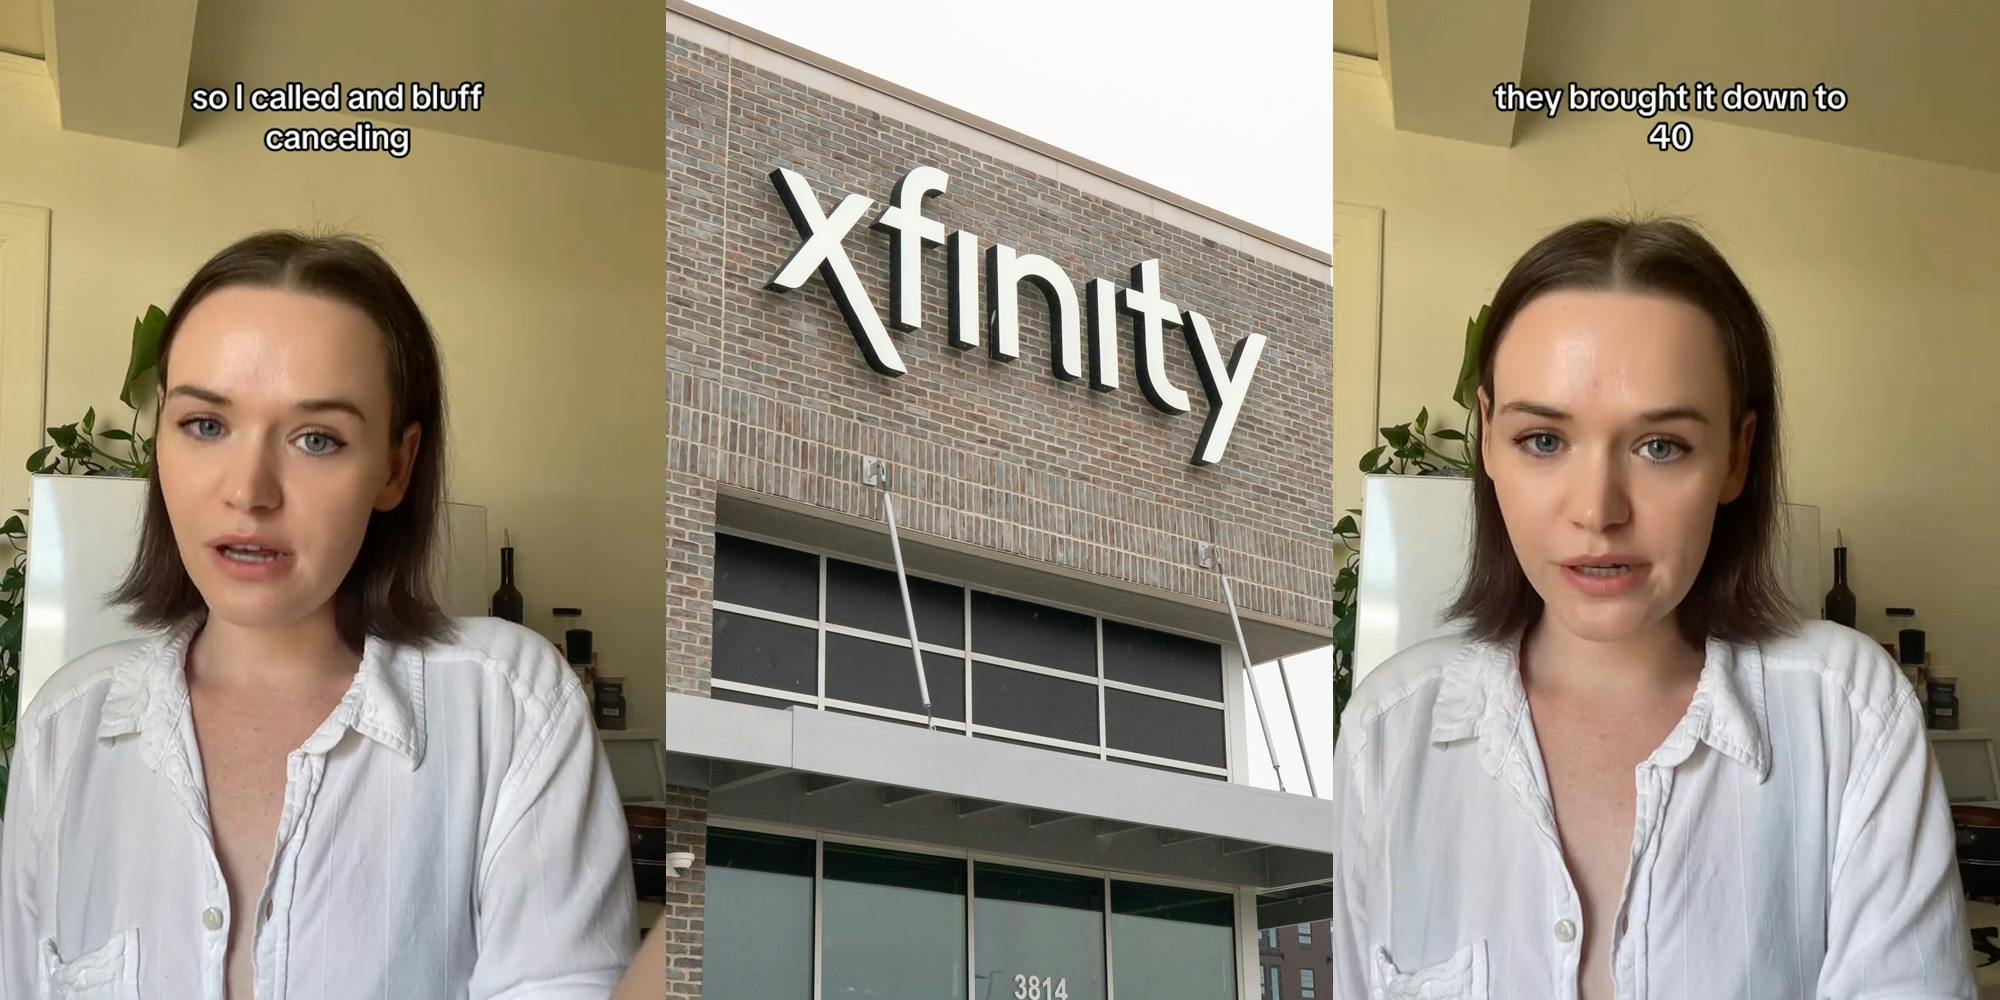 woman speaking with caption "so I called and bluff canceling" (l) XFinity sign on building (c) woman speaking with caption "they brought it down to 40" (r)